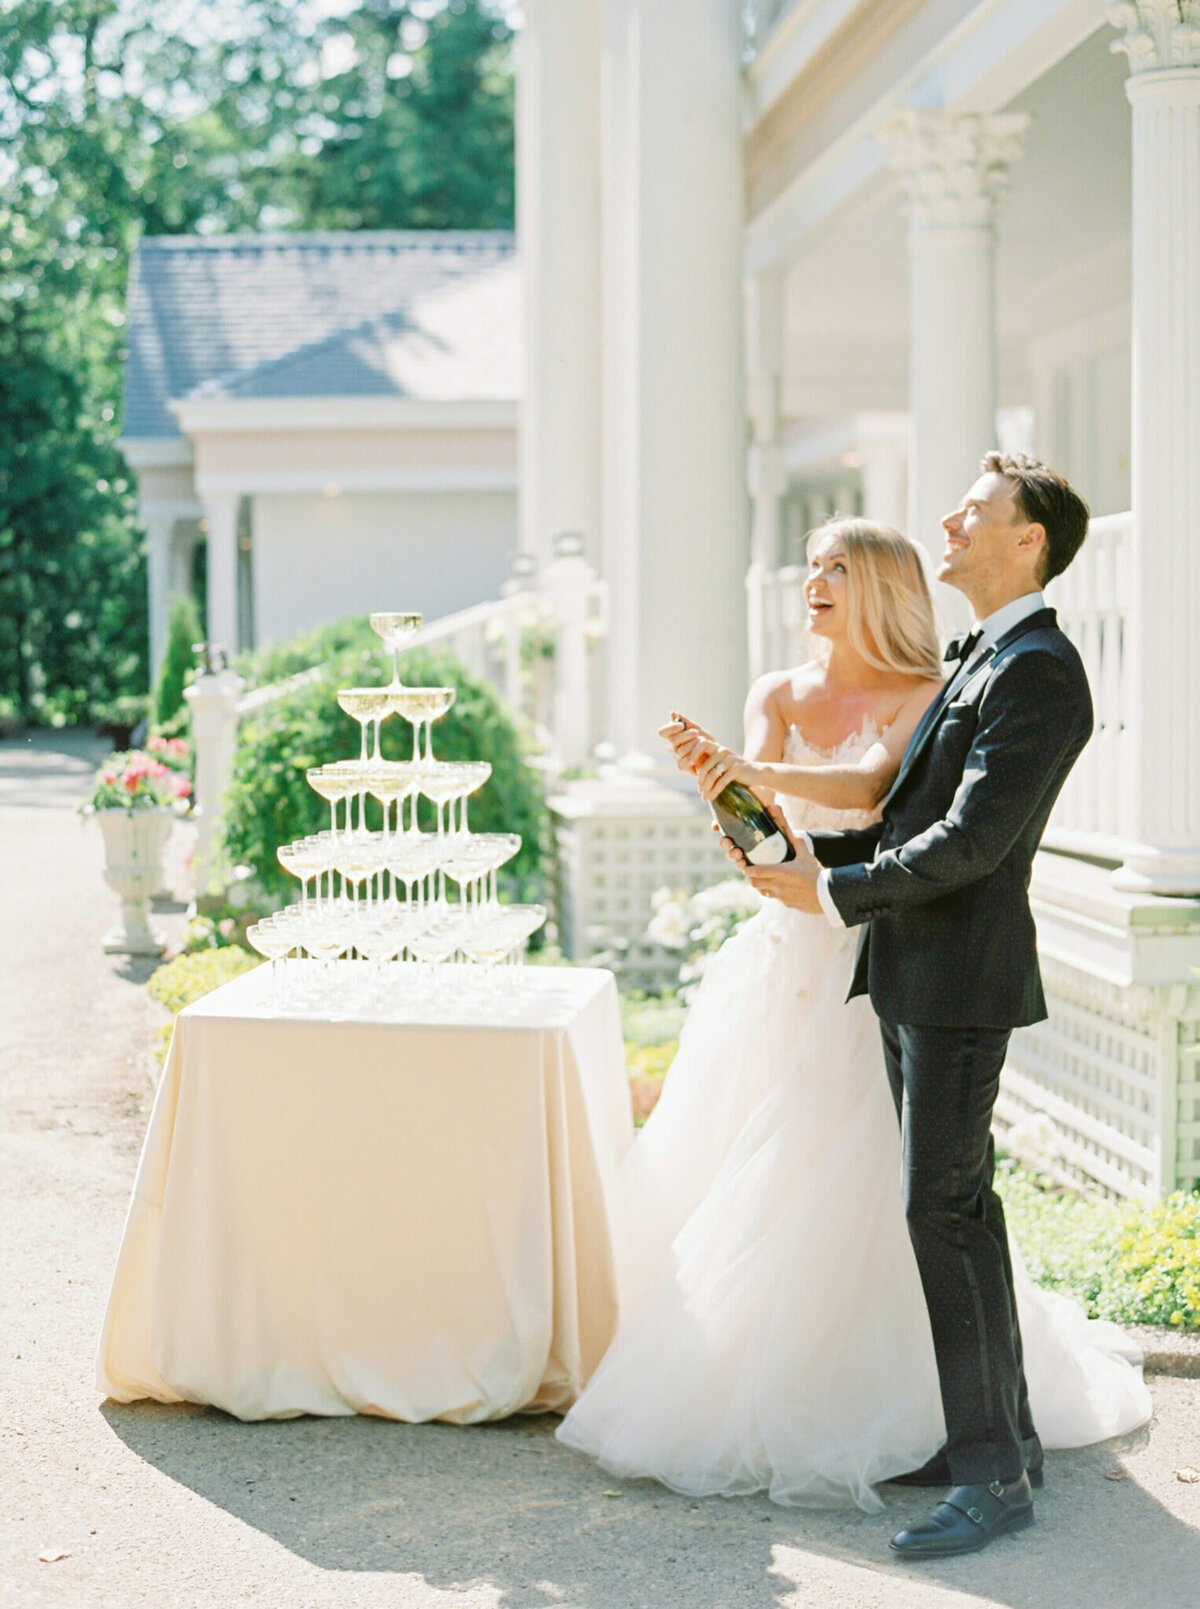 Bride and groom popping champagne in front of The Norland Historic Estate, a classic vintage wedding venue in Lethbridge, AB, featured on the Brontë Bride Vendor Guide.